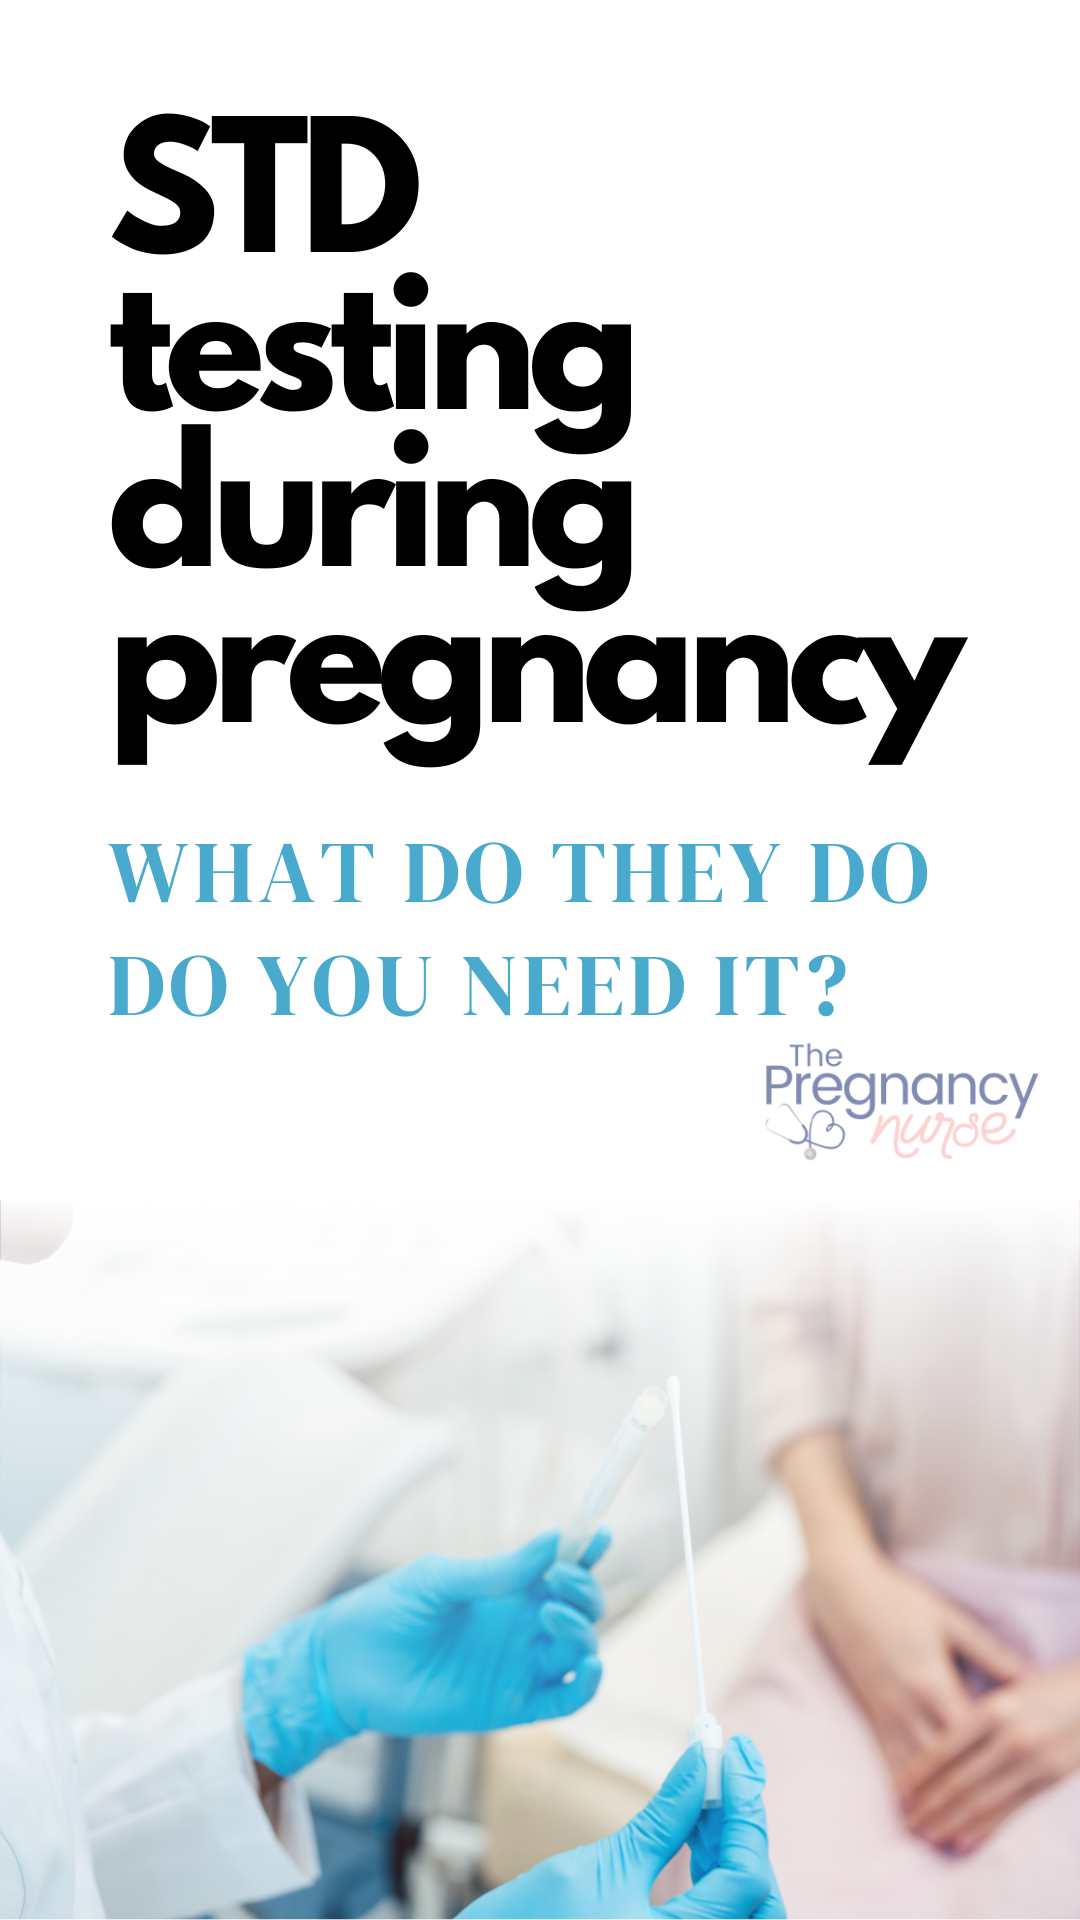 Pregnancy comes with its fair share of responsibilities, and STD testing is one that cannot be ignored. This detailed guide explains why STD tests are a non-negotiable part of prenatal care, the kind of tests you should expect, and why they matter for your baby's health.